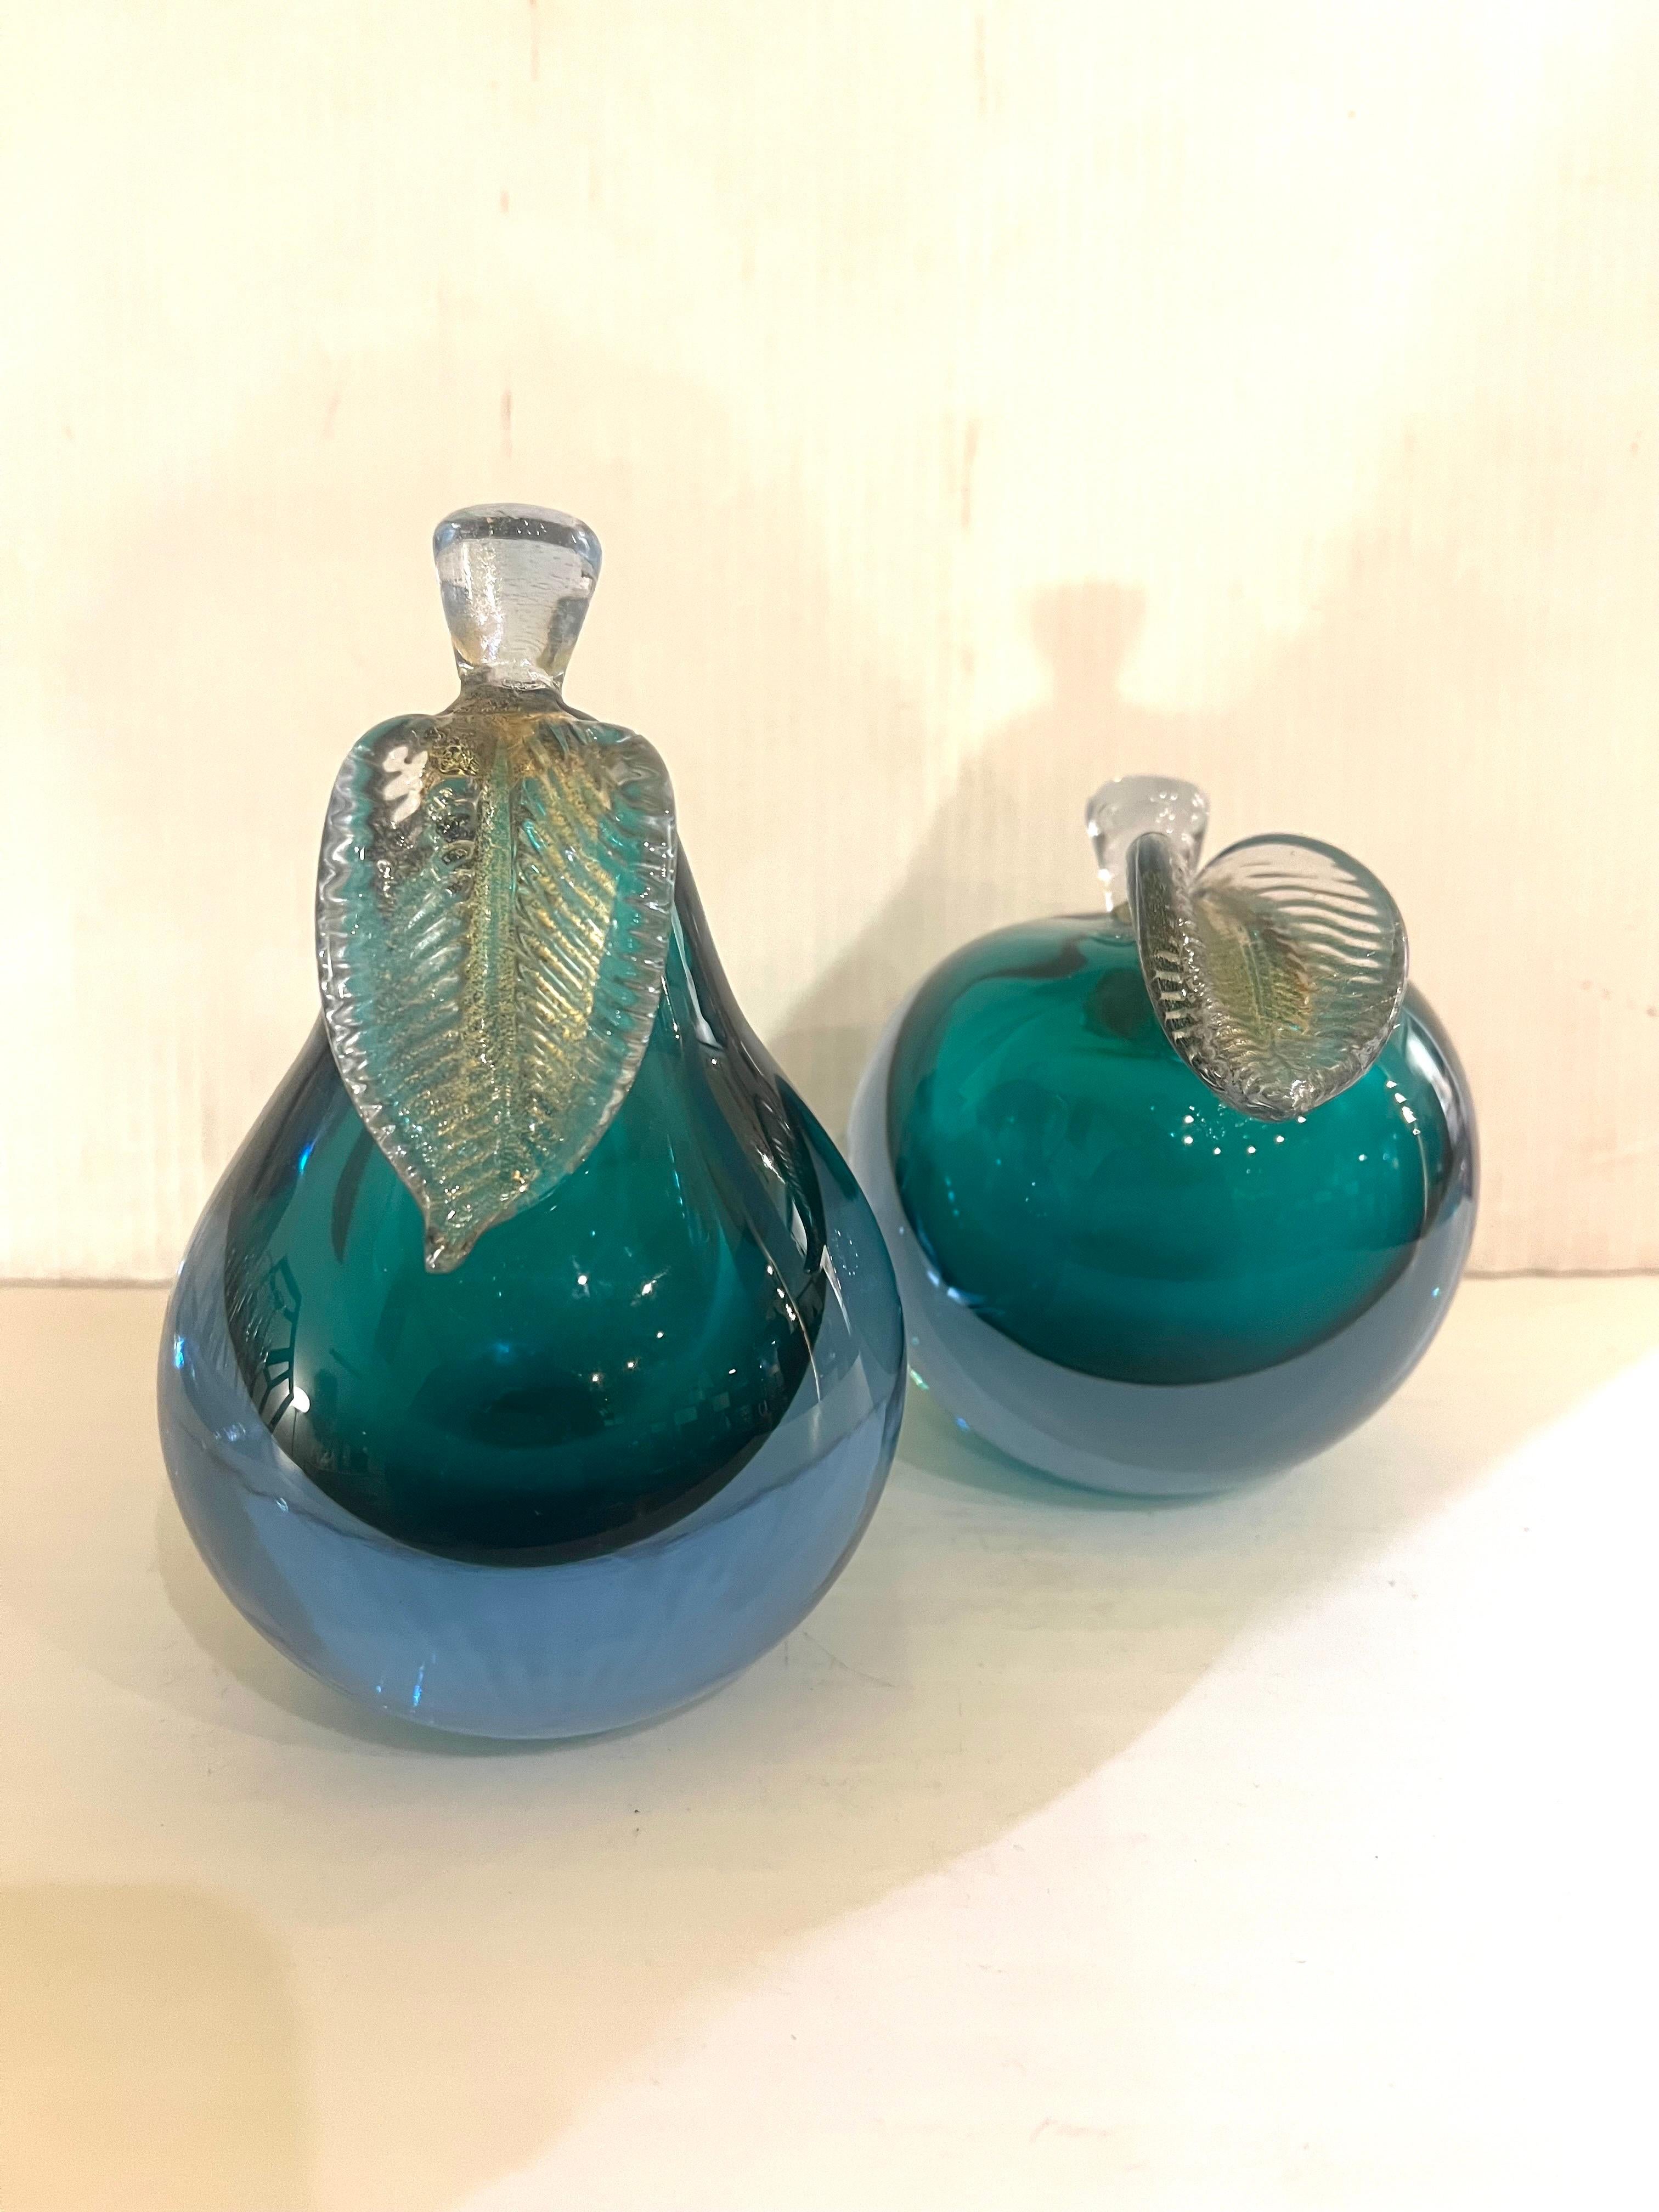 Livio Seguso Venetian Murano Italy Art Glass Apple and Pear Bookends Sculptures For Sale 2